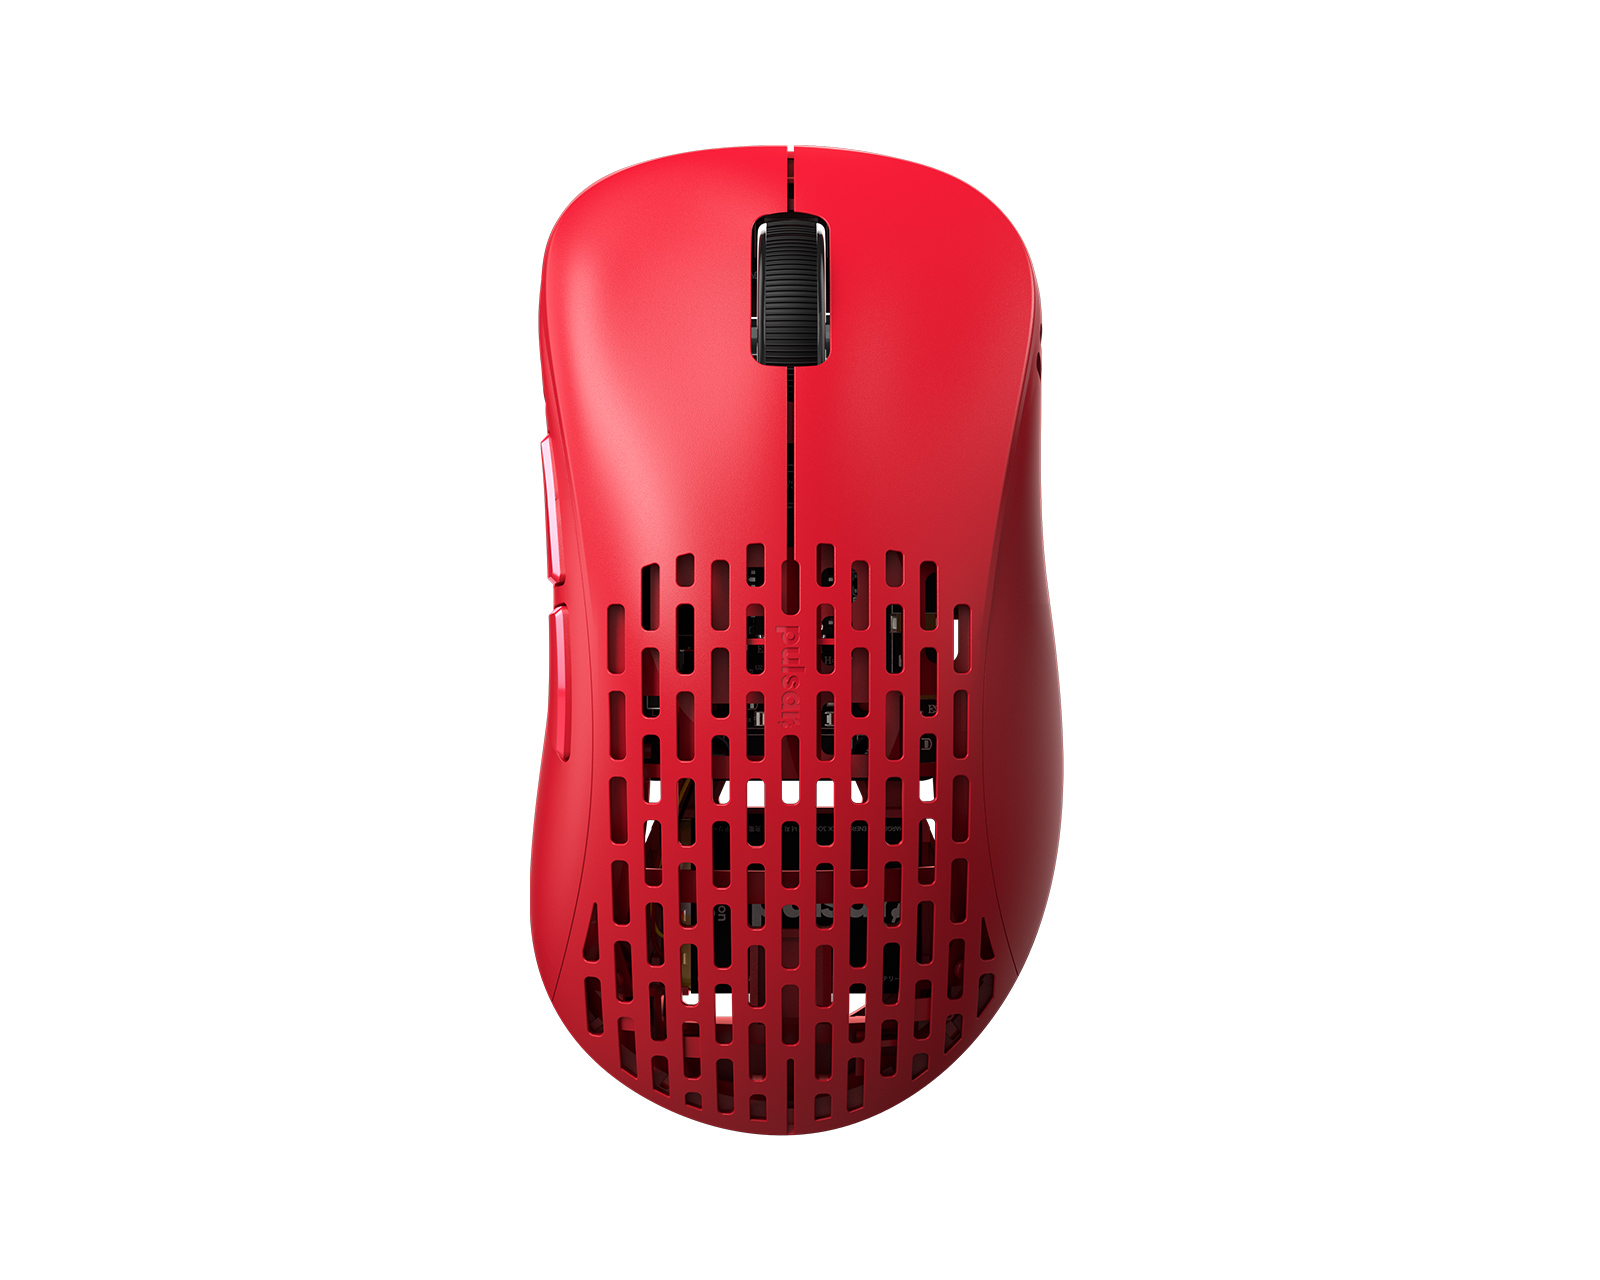 Pulsar Xlite Wireless v2 Mini Gaming Mouse - Red - Limited Edition (DEMO)